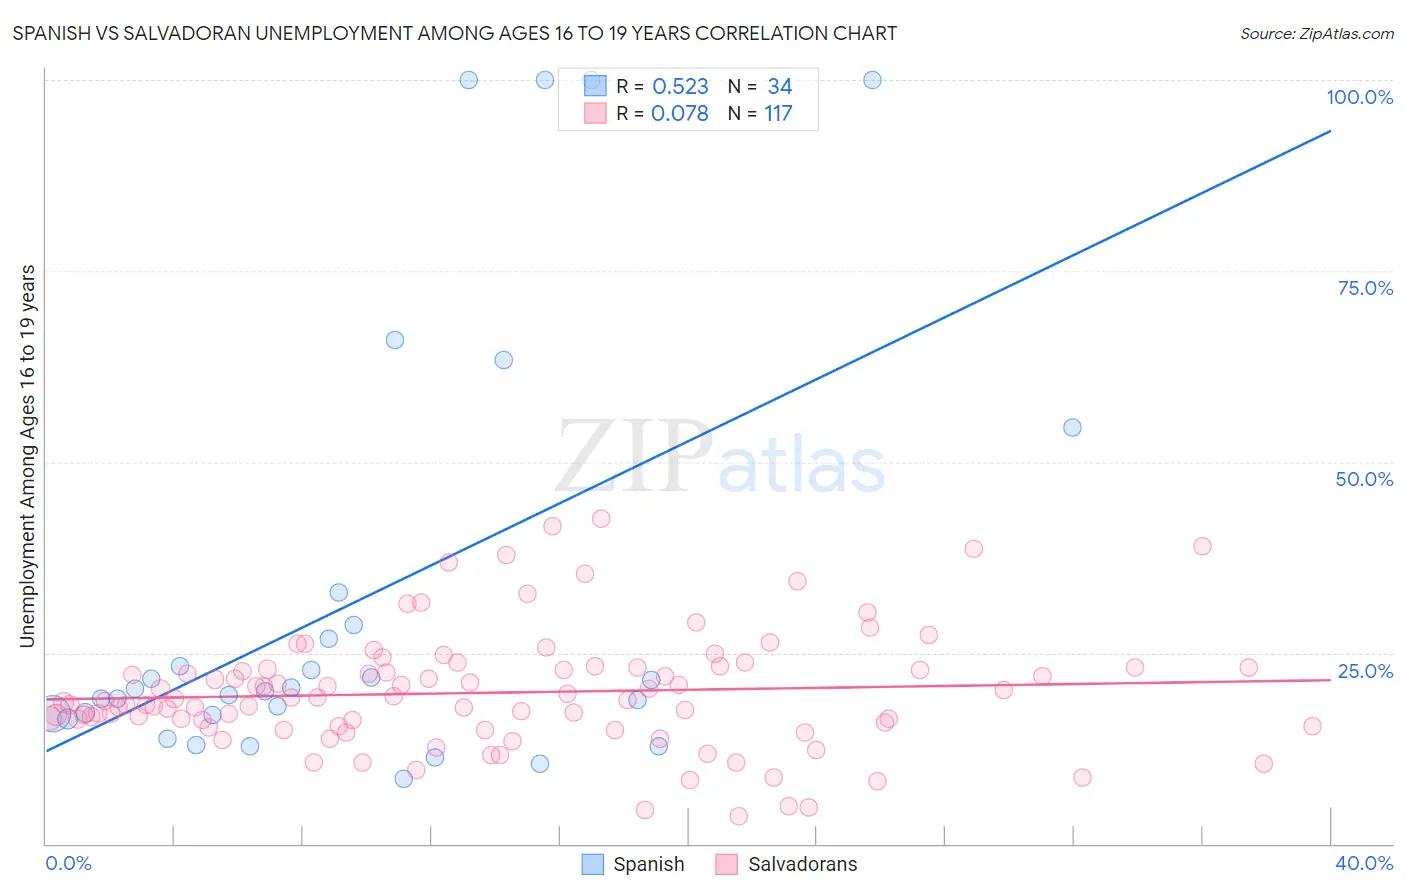 Spanish vs Salvadoran Unemployment Among Ages 16 to 19 years